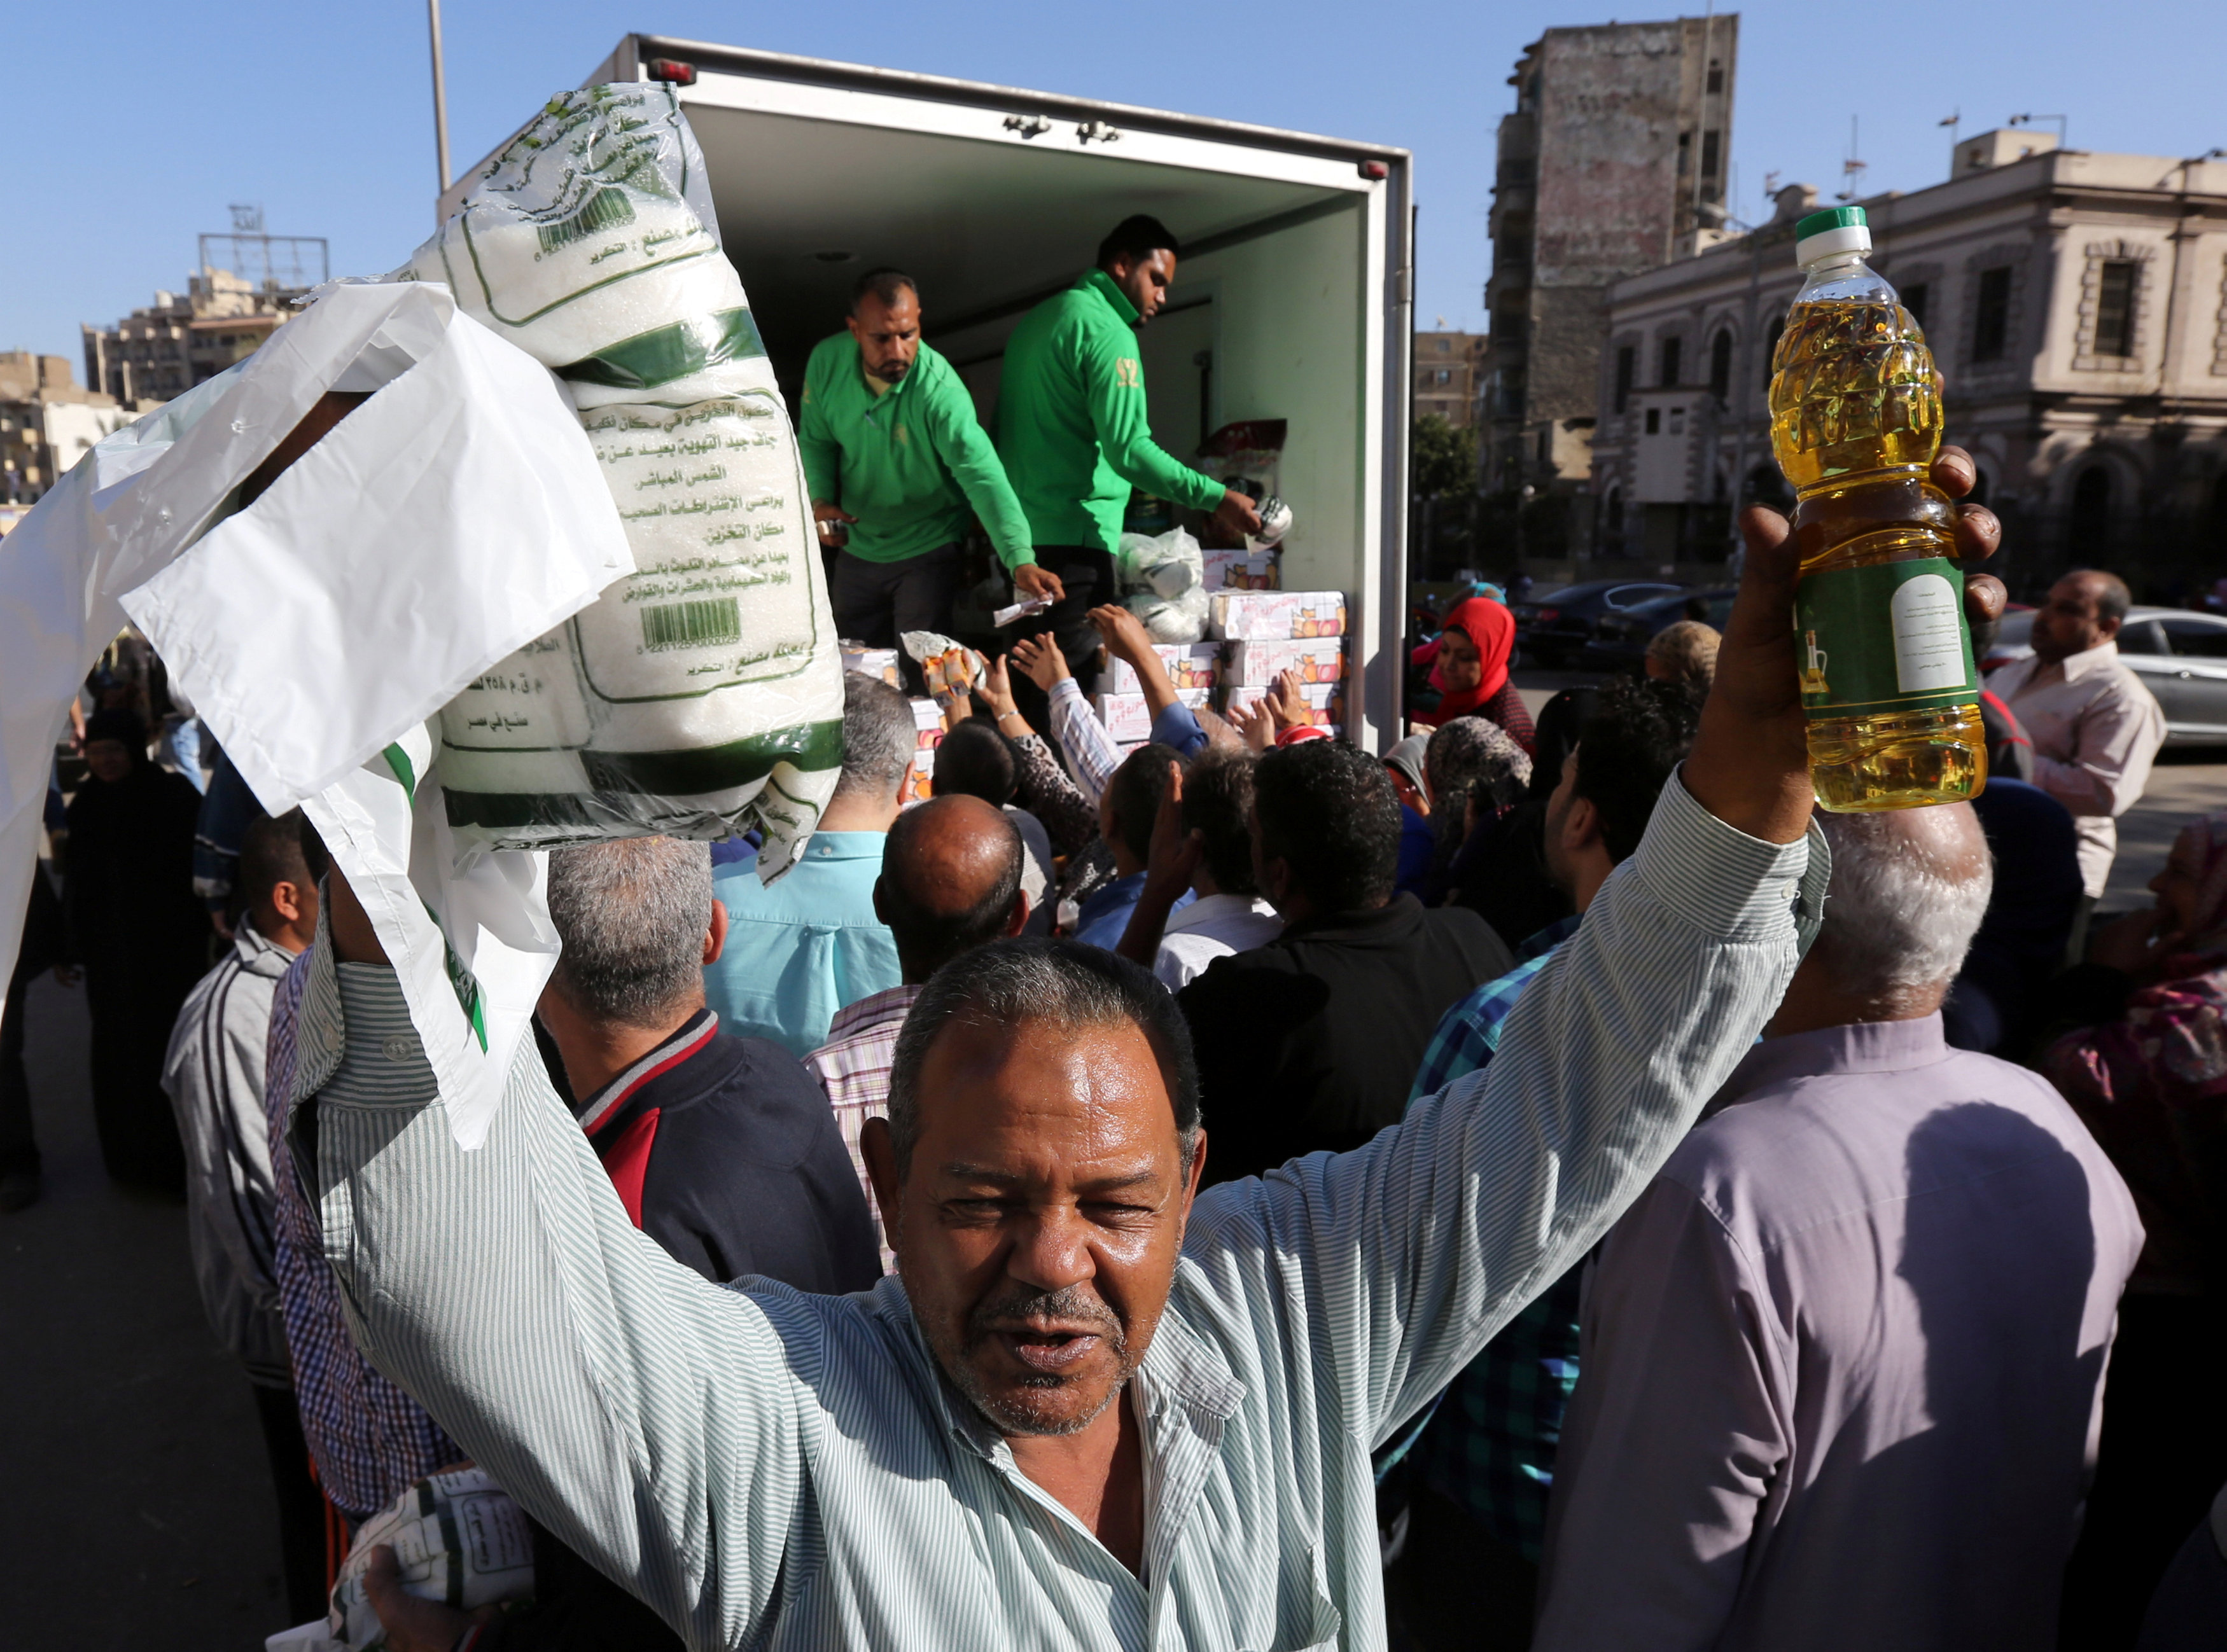 A man smiles as he carries subsidized sugar and oil after buying them from a government truck, after goods shortage in retail stores across the country and after the central bank floated the pound currency, in downtown Cairo, Egypt, November 7, 2016. REUTERS/Mohamed Abd El Ghany